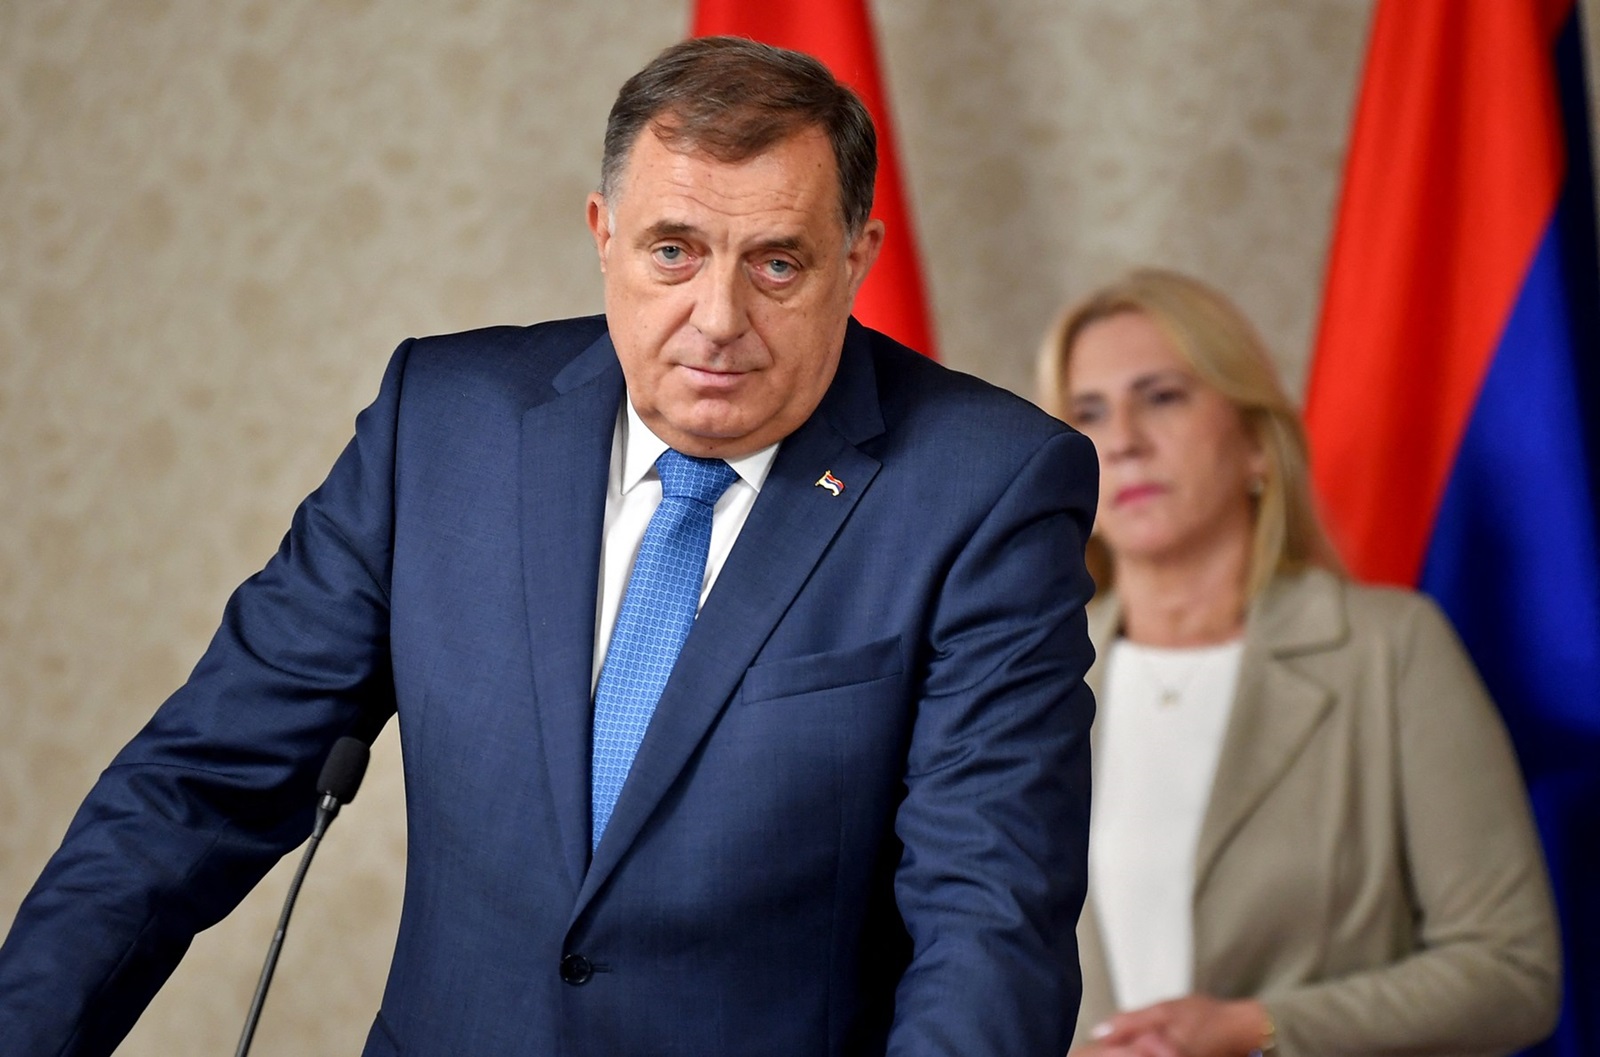 President of Republika Srpska, Bosnian Serb entity in Bosnia and Herzegovina, Milorad Dodik, often identified as political leader of Bosnian Serbs, addresses media after an appearance in court, on May 22, 2024, on the eve of  a potential UN resolution declaring July 11 an international day to remember the Srebrenica genocide.,Image: 875490159, License: Rights-managed, Restrictions: , Model Release: no, Credit line: ELVIS BARUKCIC / AFP / Profimedia